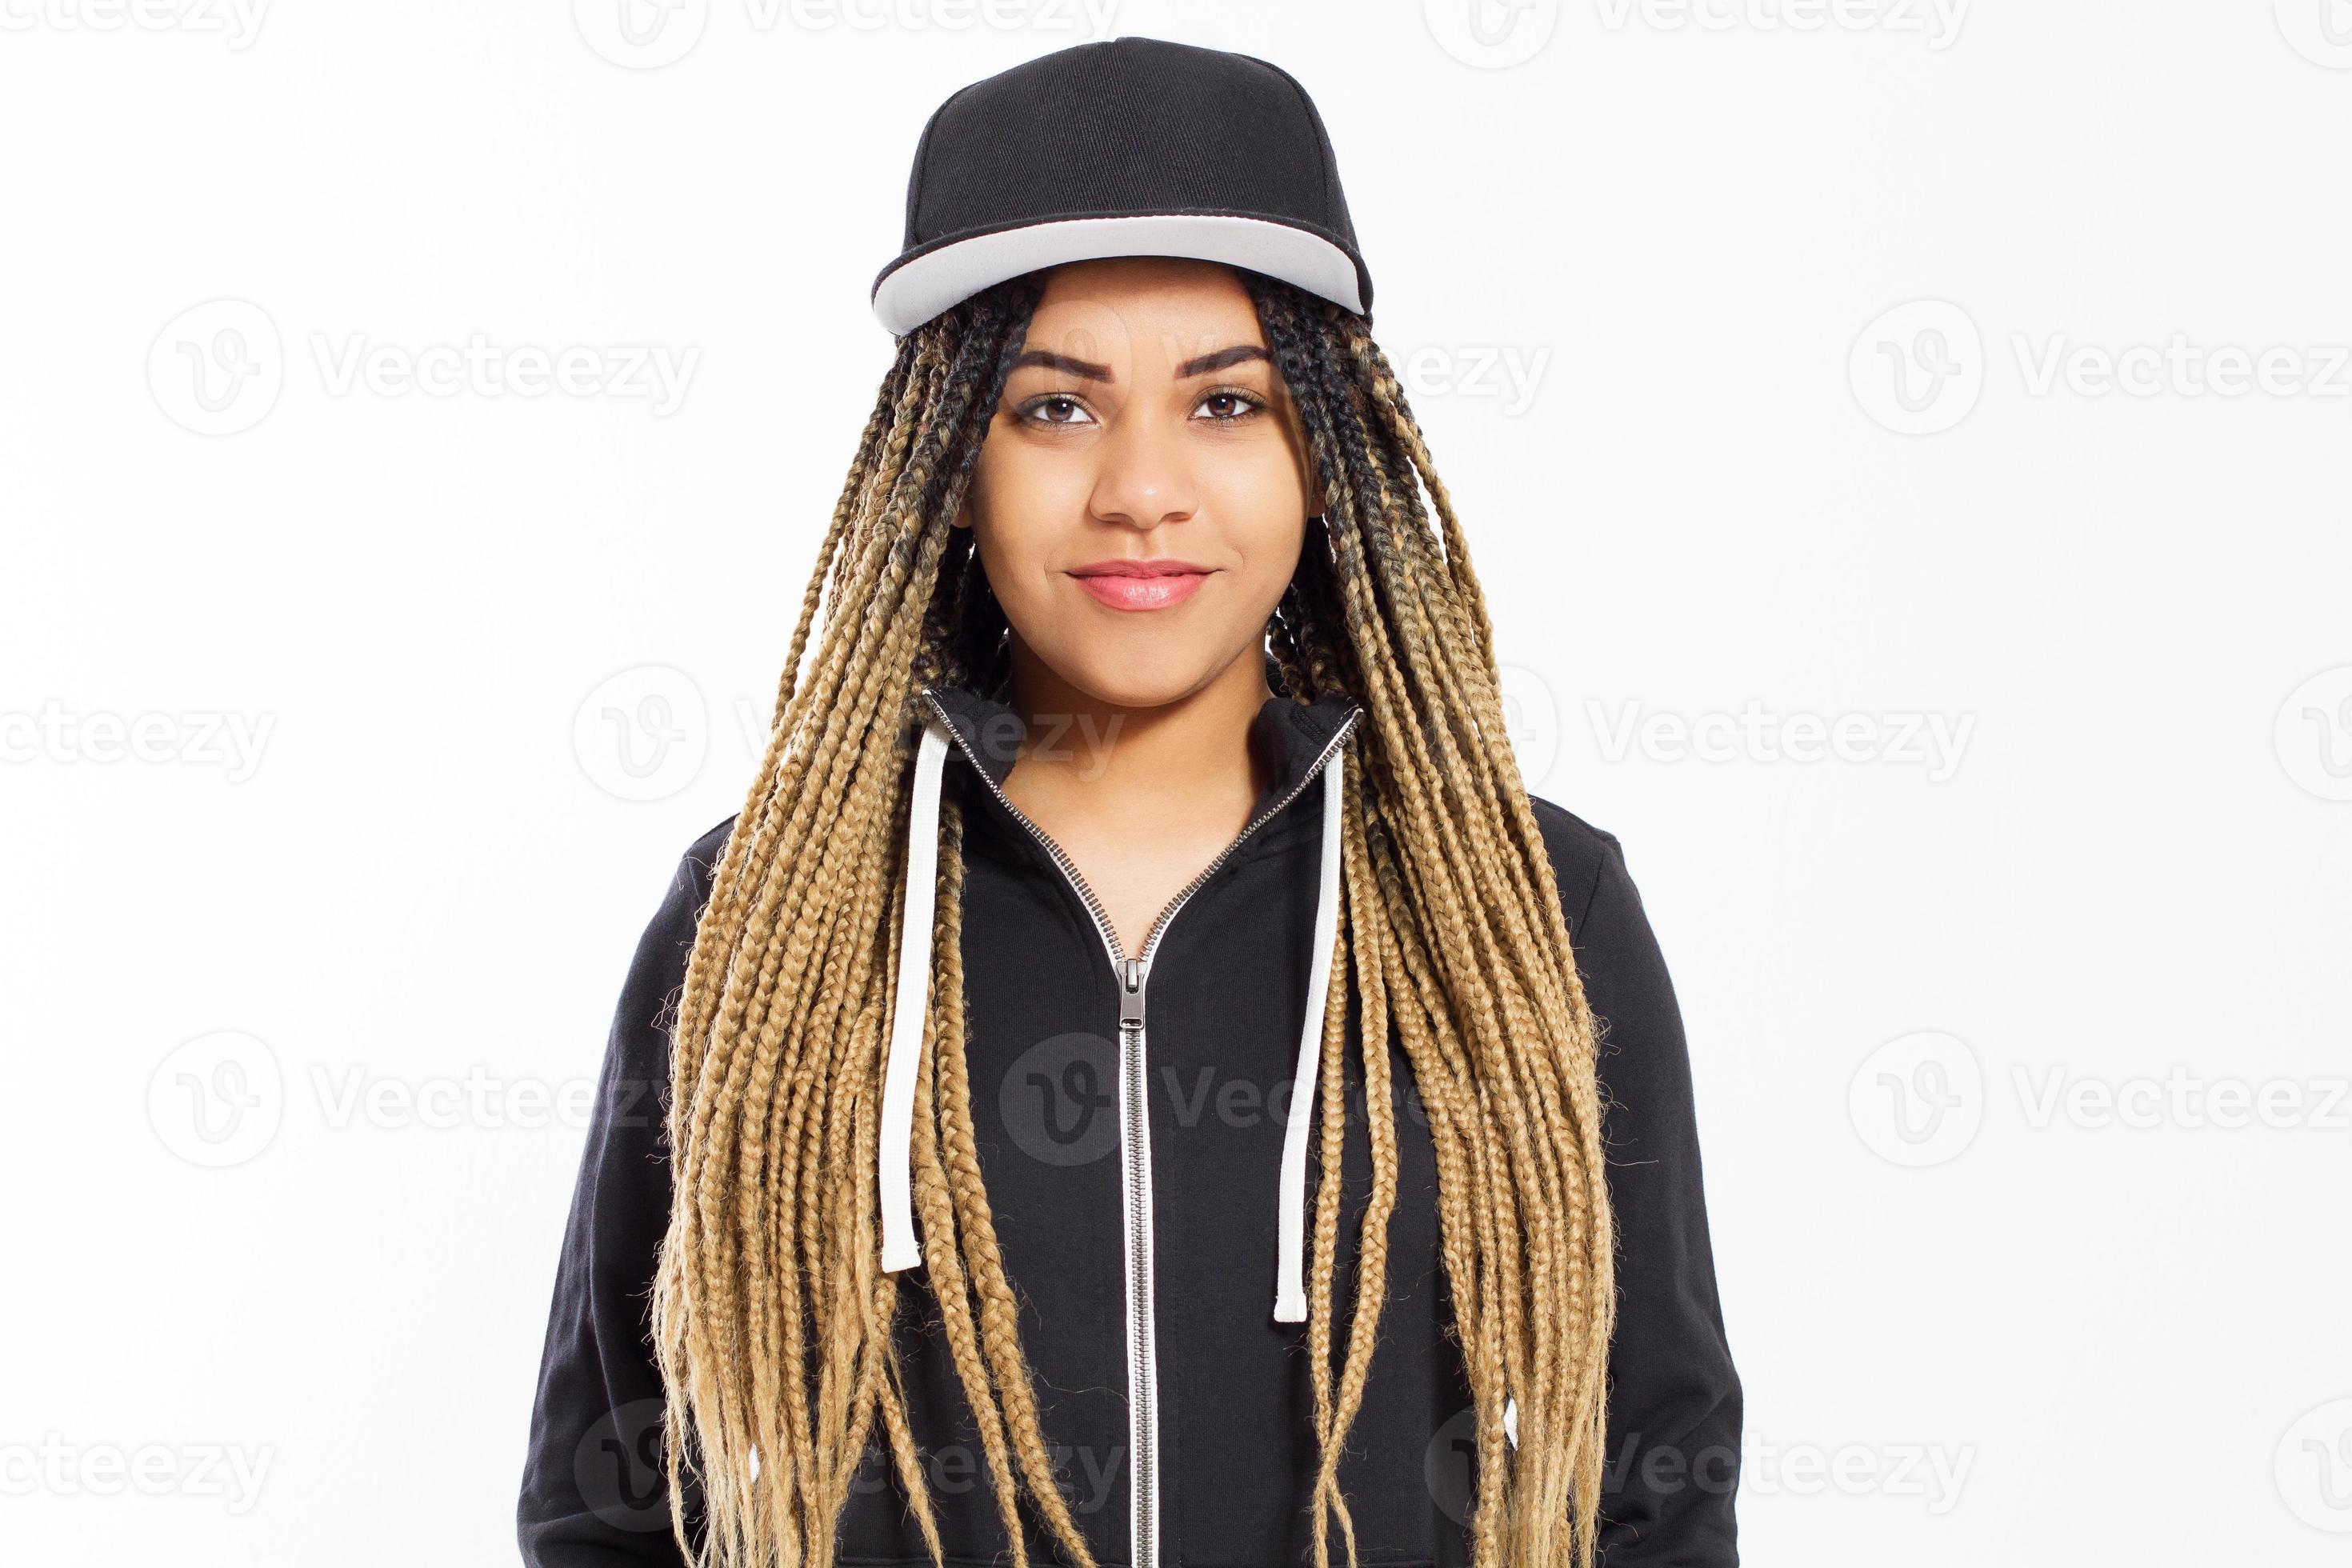 https://static.vecteezy.com/system/resources/previews/007/625/440/large_2x/portrait-young-female-hipster-with-cap-and-dreadlocks-isolated-on-white-background-photo.jpg